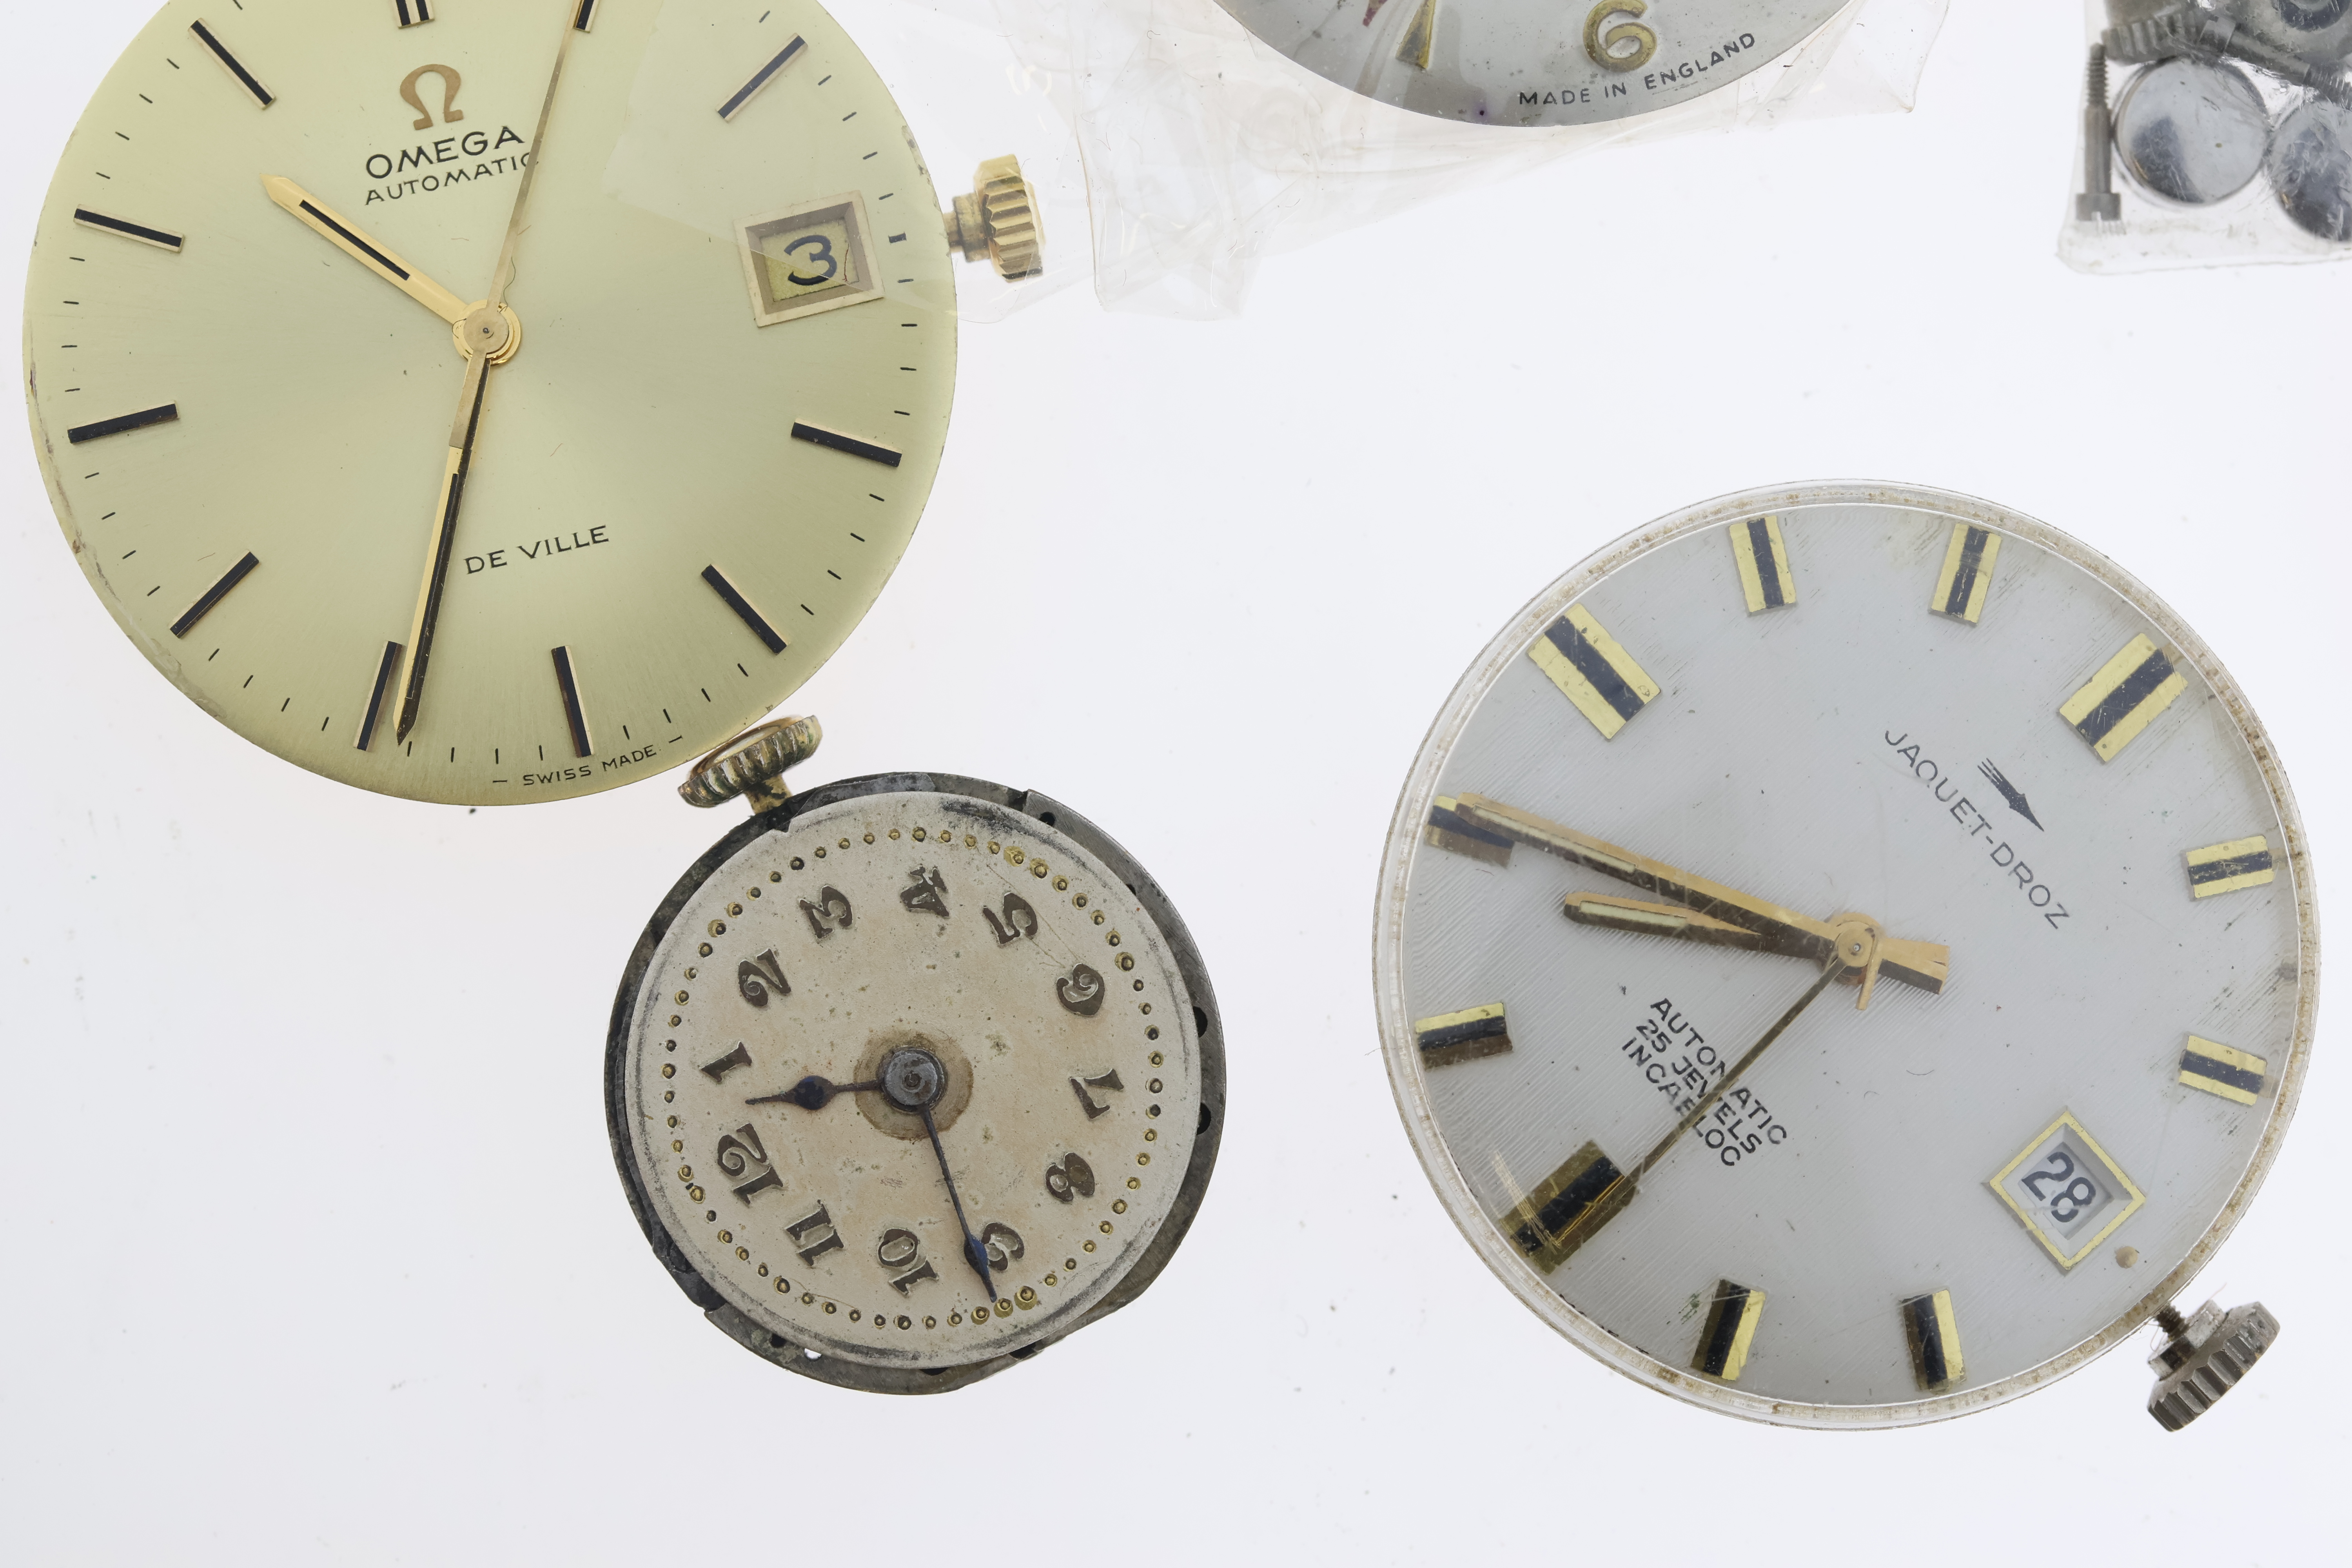 *TO BE SOLD WITHOUT RESERVE* Job lot of Movement & Dials, Including Omega & Jaquet Droz, *AS FOUND* - Image 3 of 6